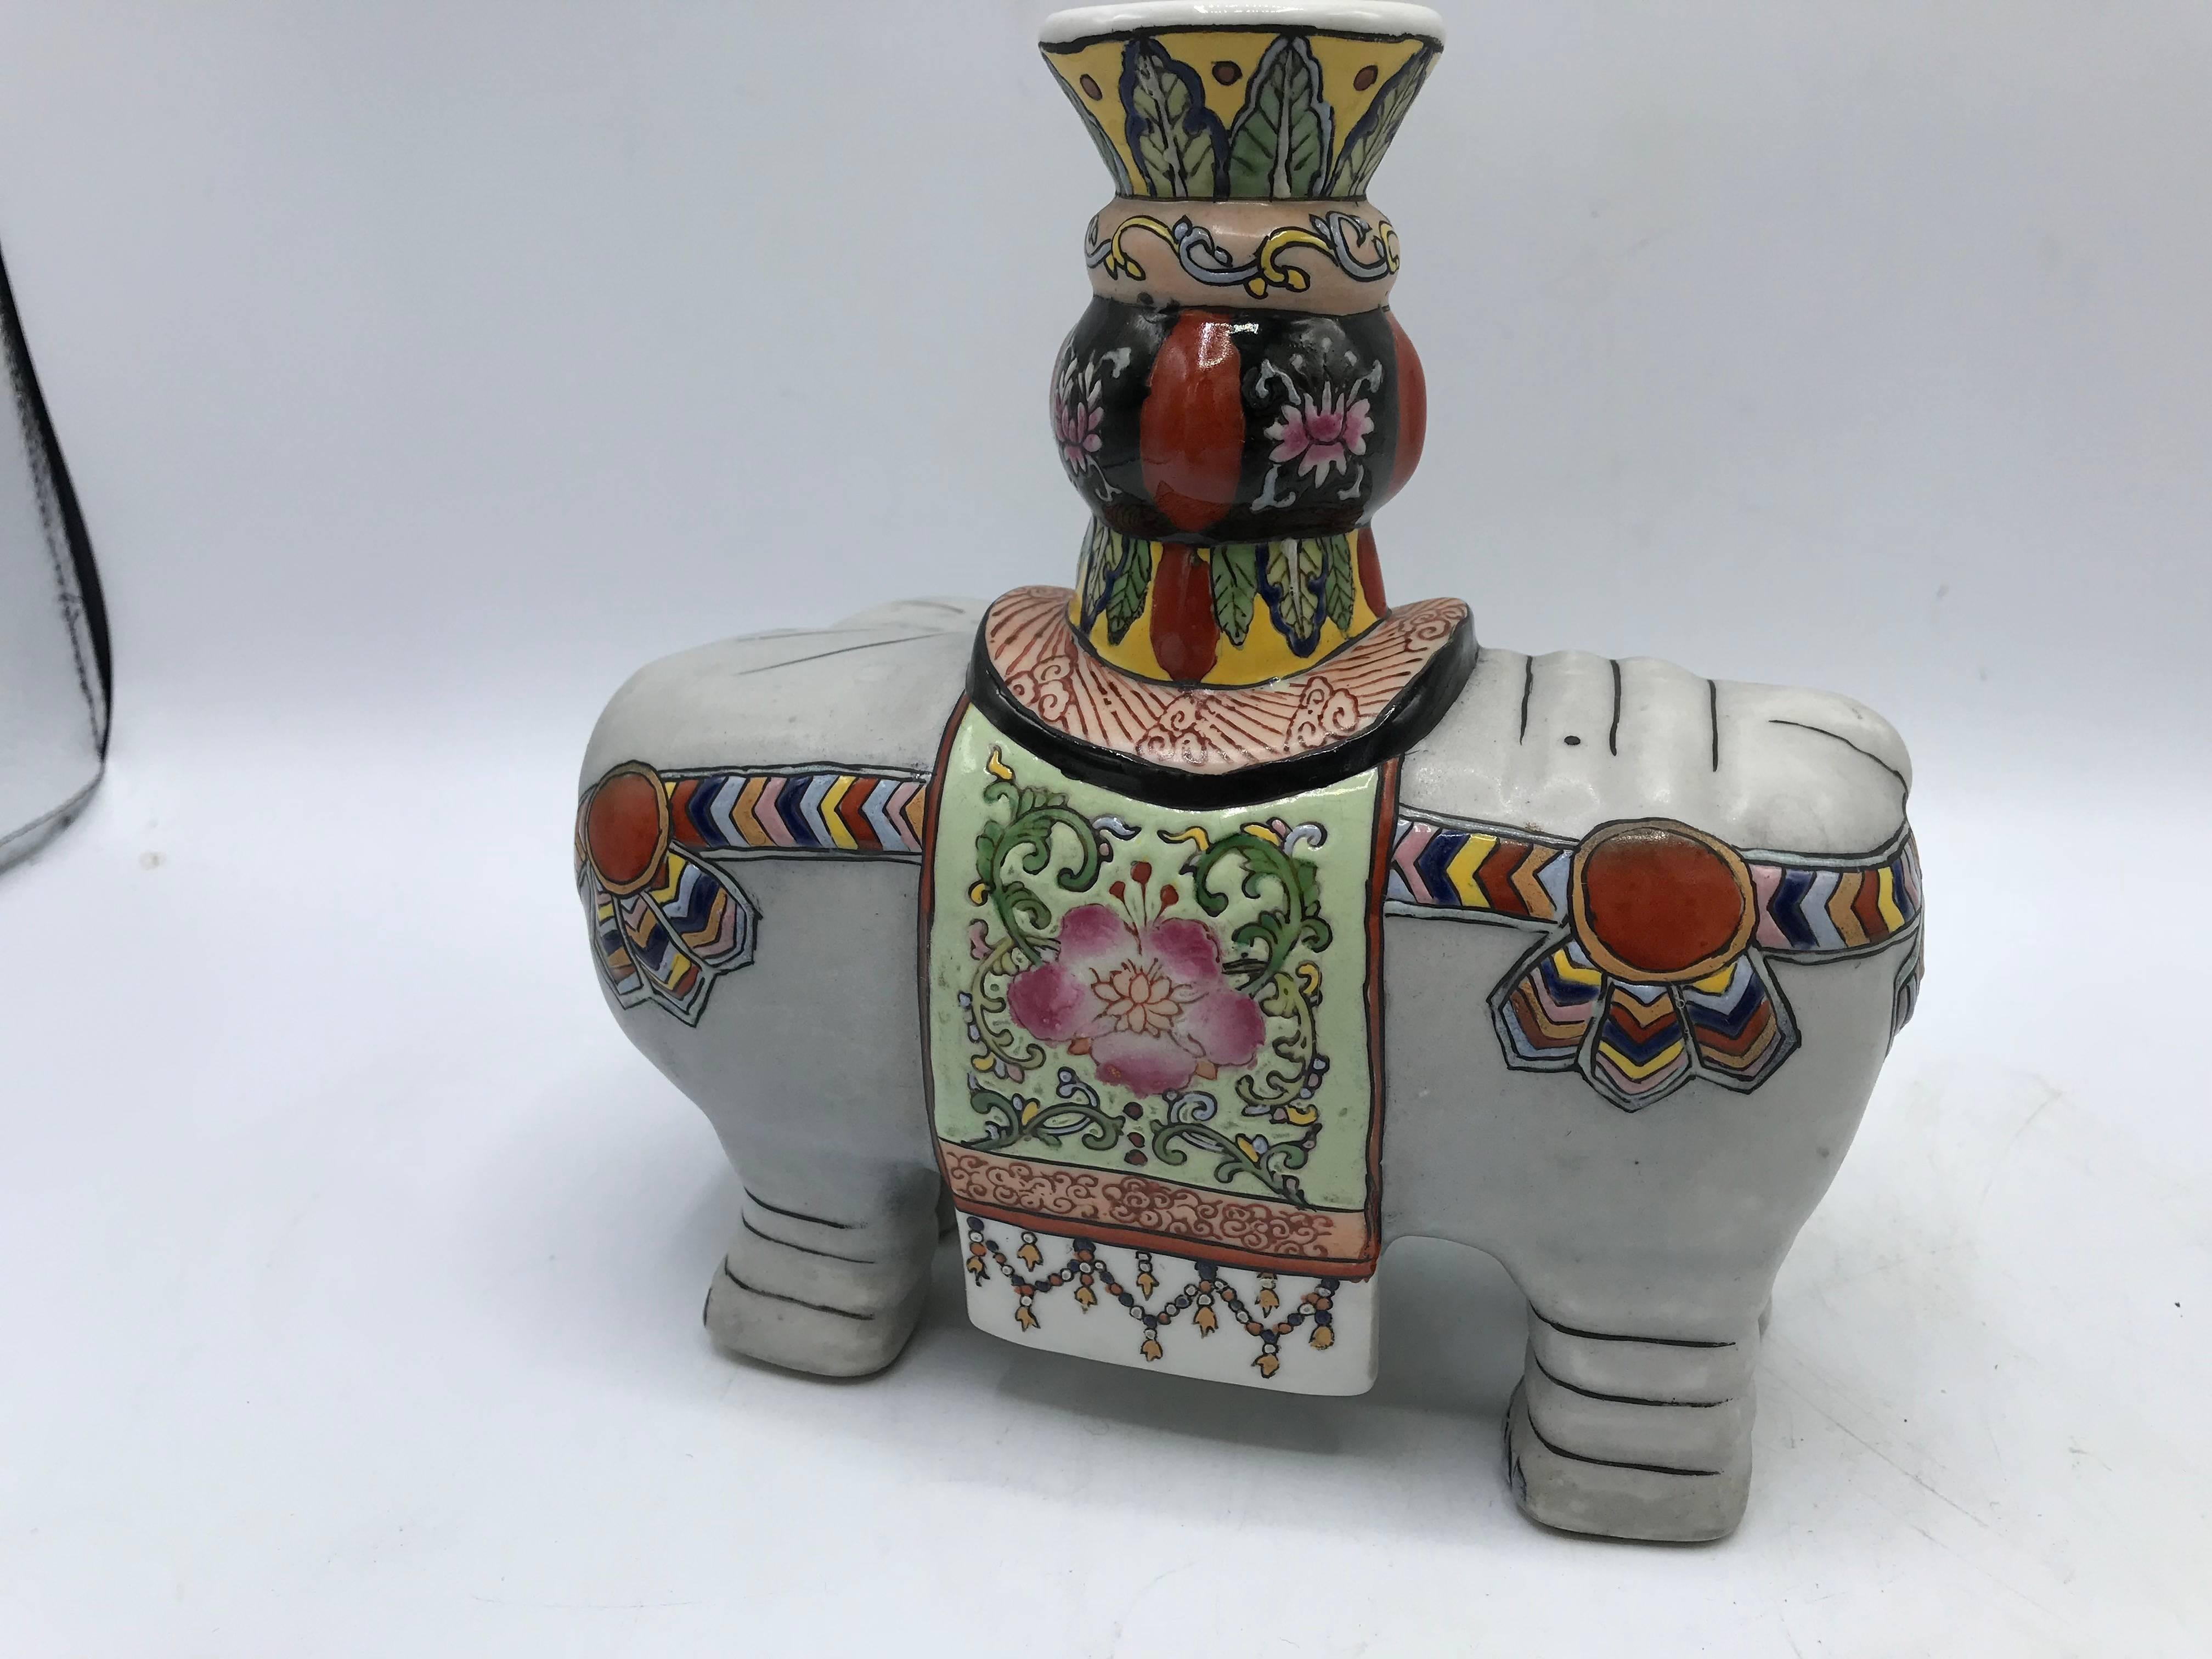 1960s Polychrome Ceramic Elephant Sculpture Candlestick Holders, Pair For Sale 3